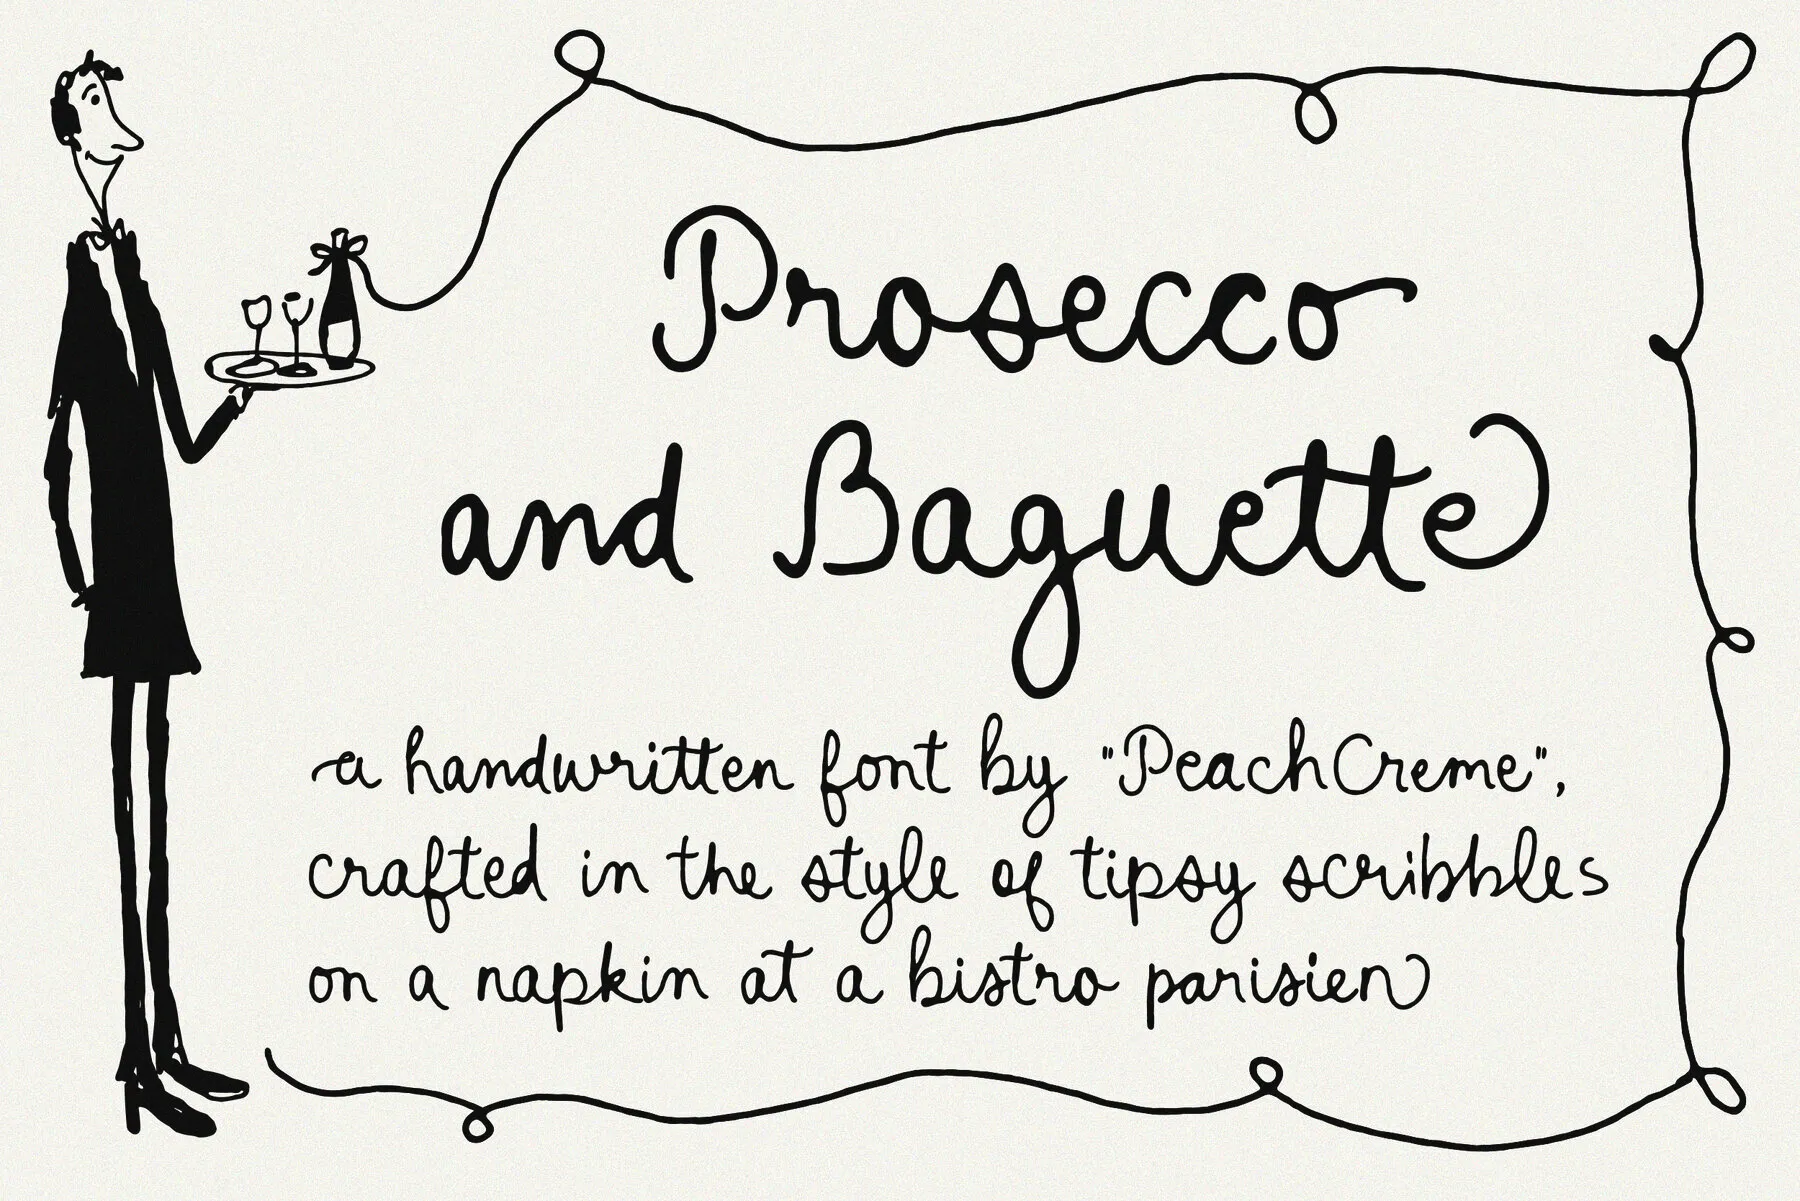 Prosecco and Baguette